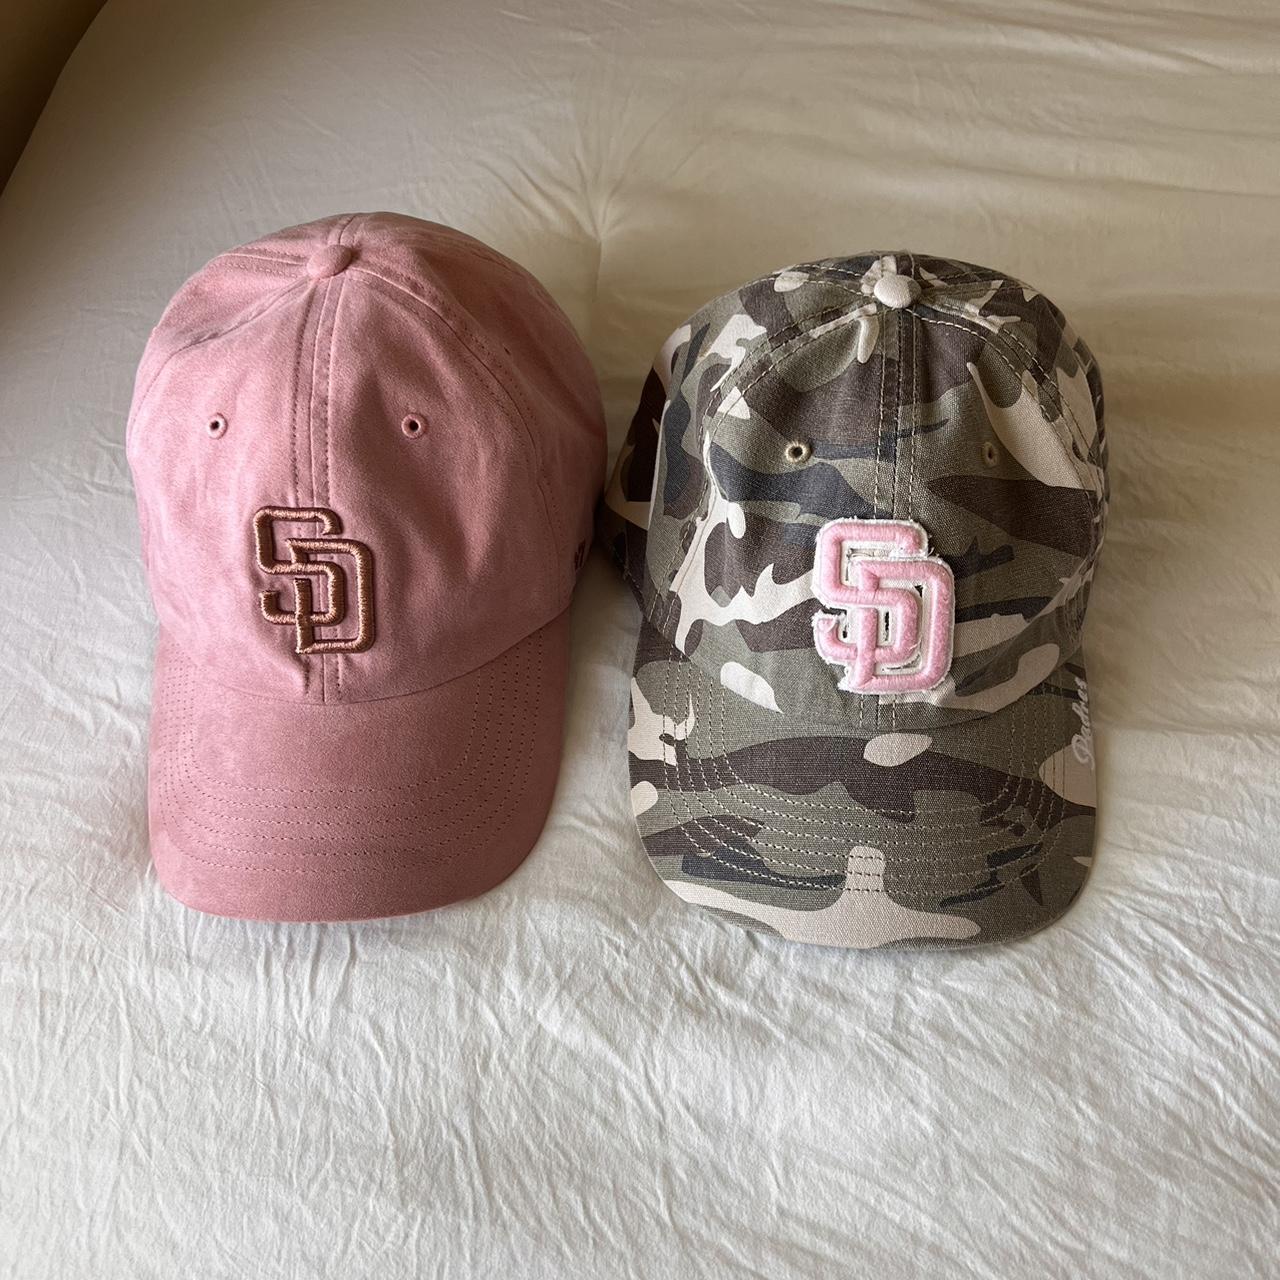 CAMO SOLD! ALL PINK is STILL AVAILABLE San Diego - Depop